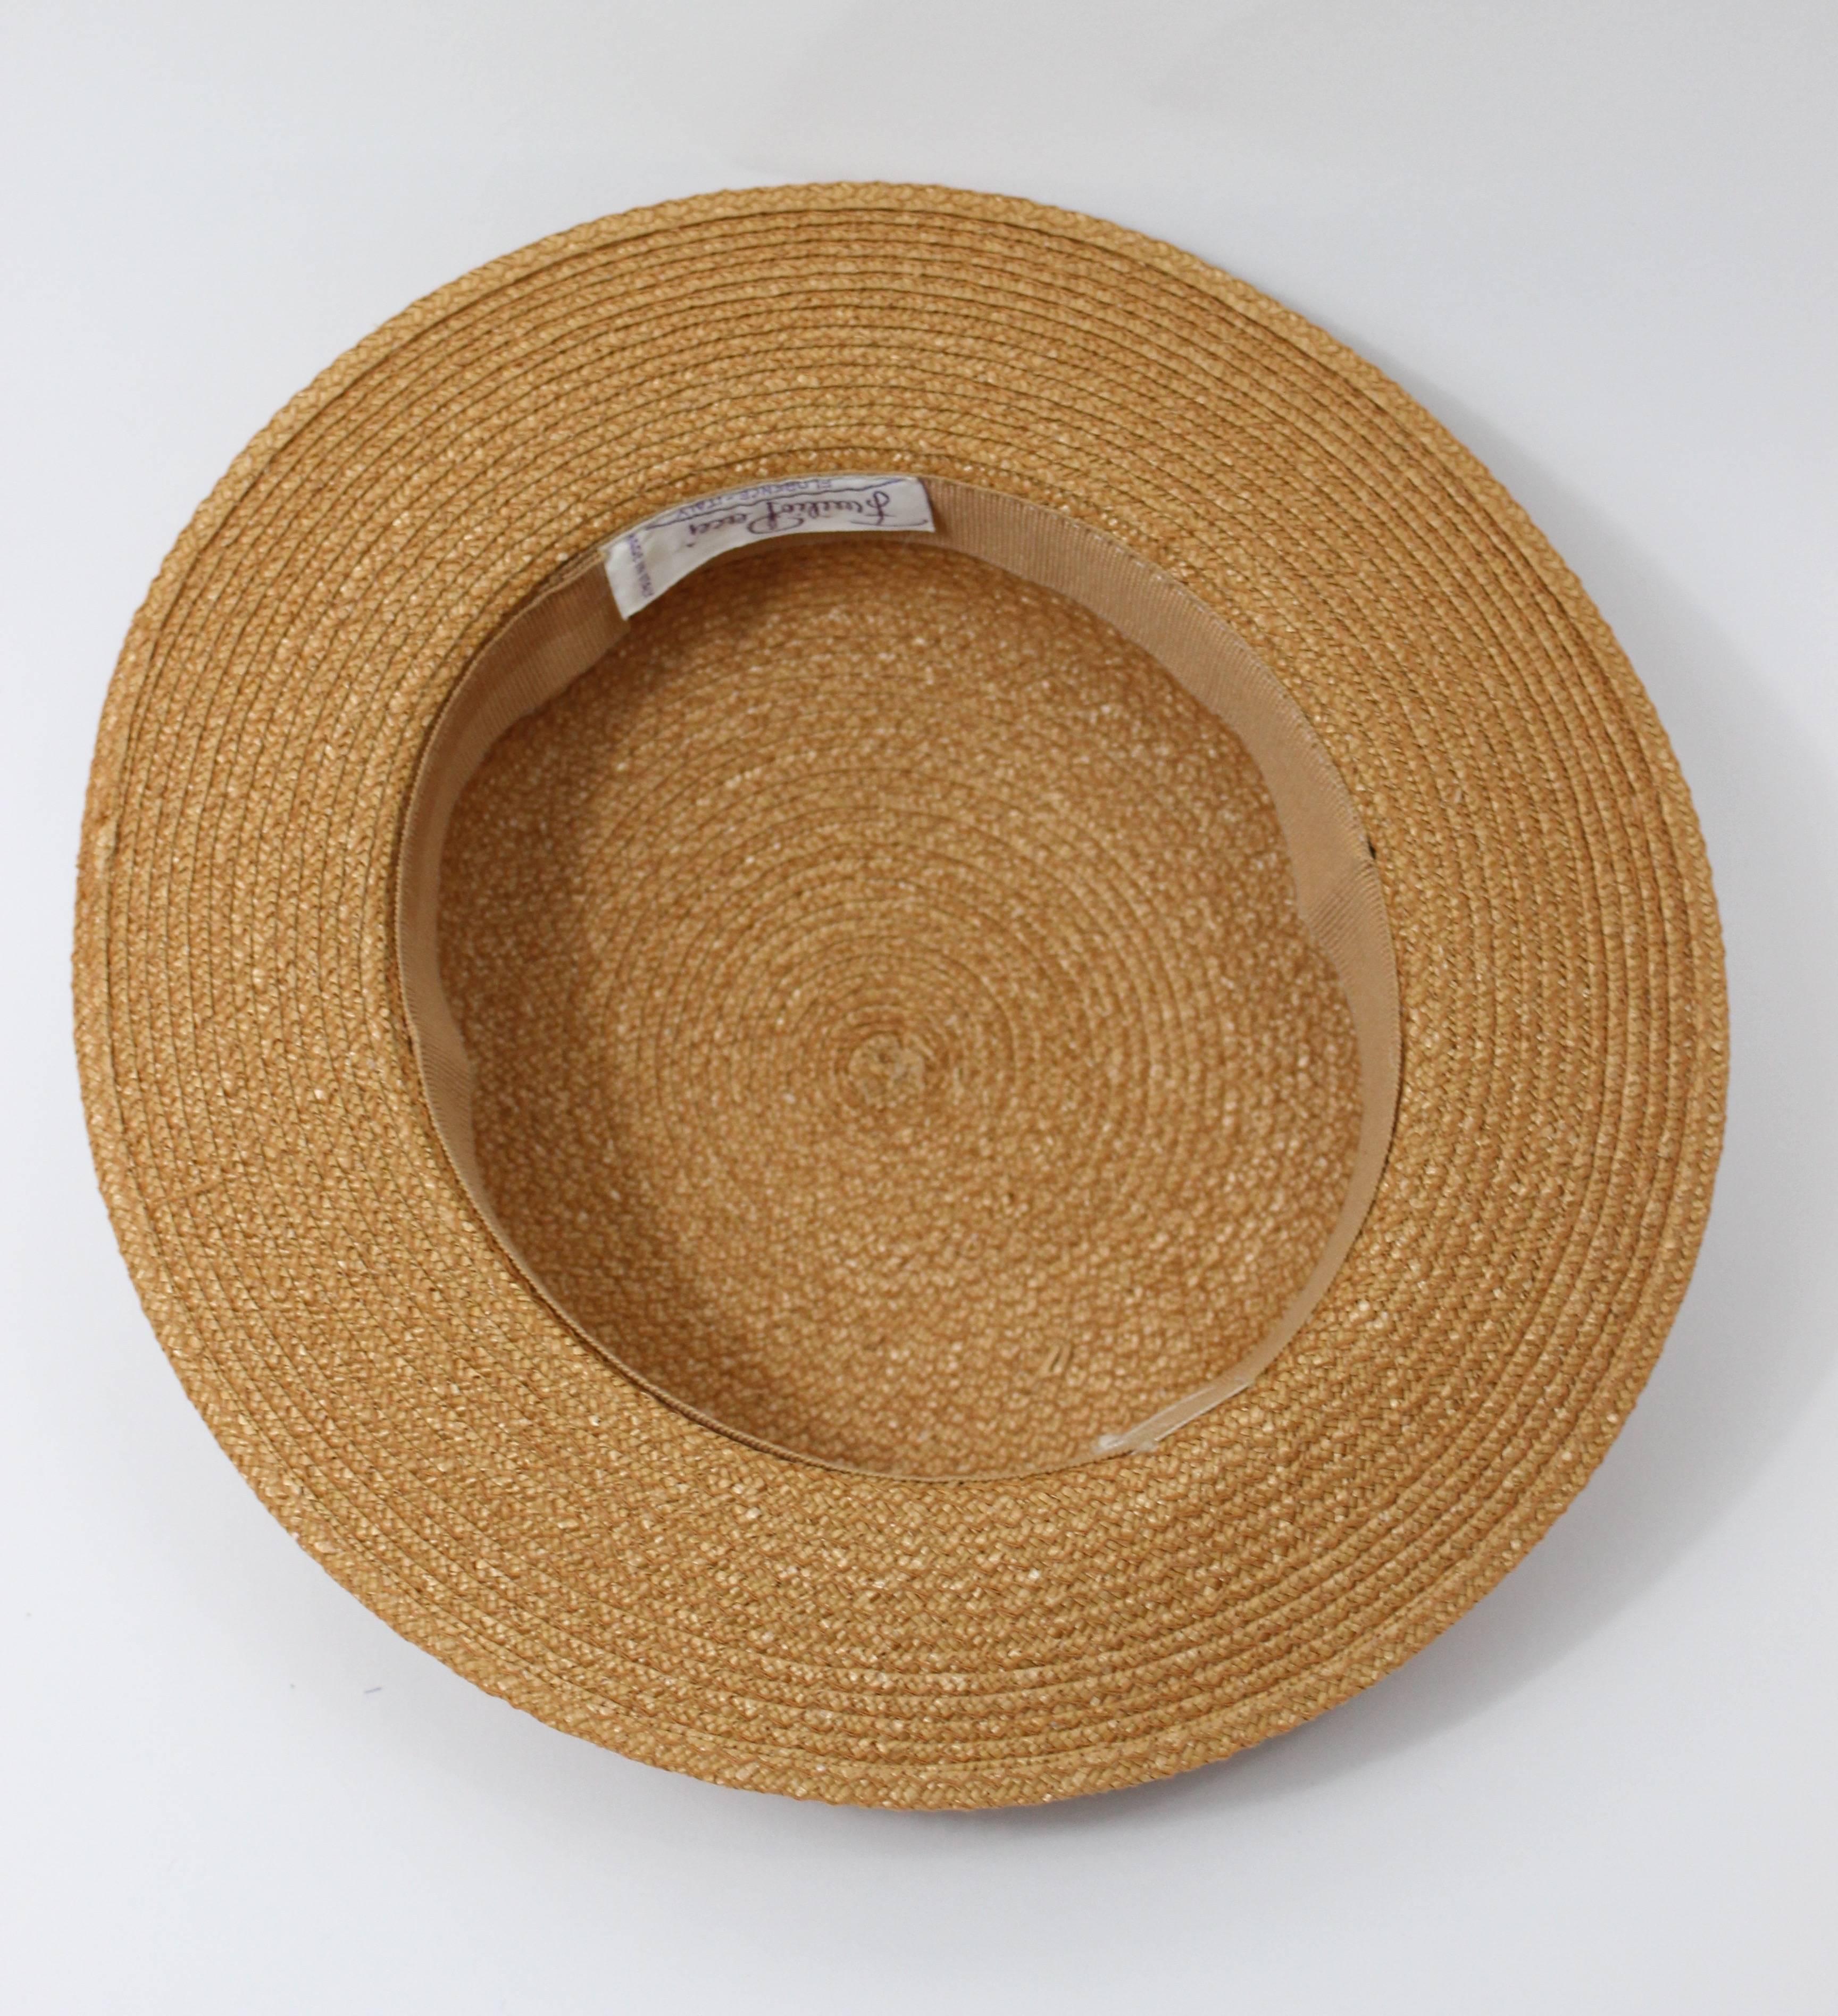 Vintage Emillio Pucci Woven Straw Tan Hat with Bow In Excellent Condition For Sale In Boca Raton, FL